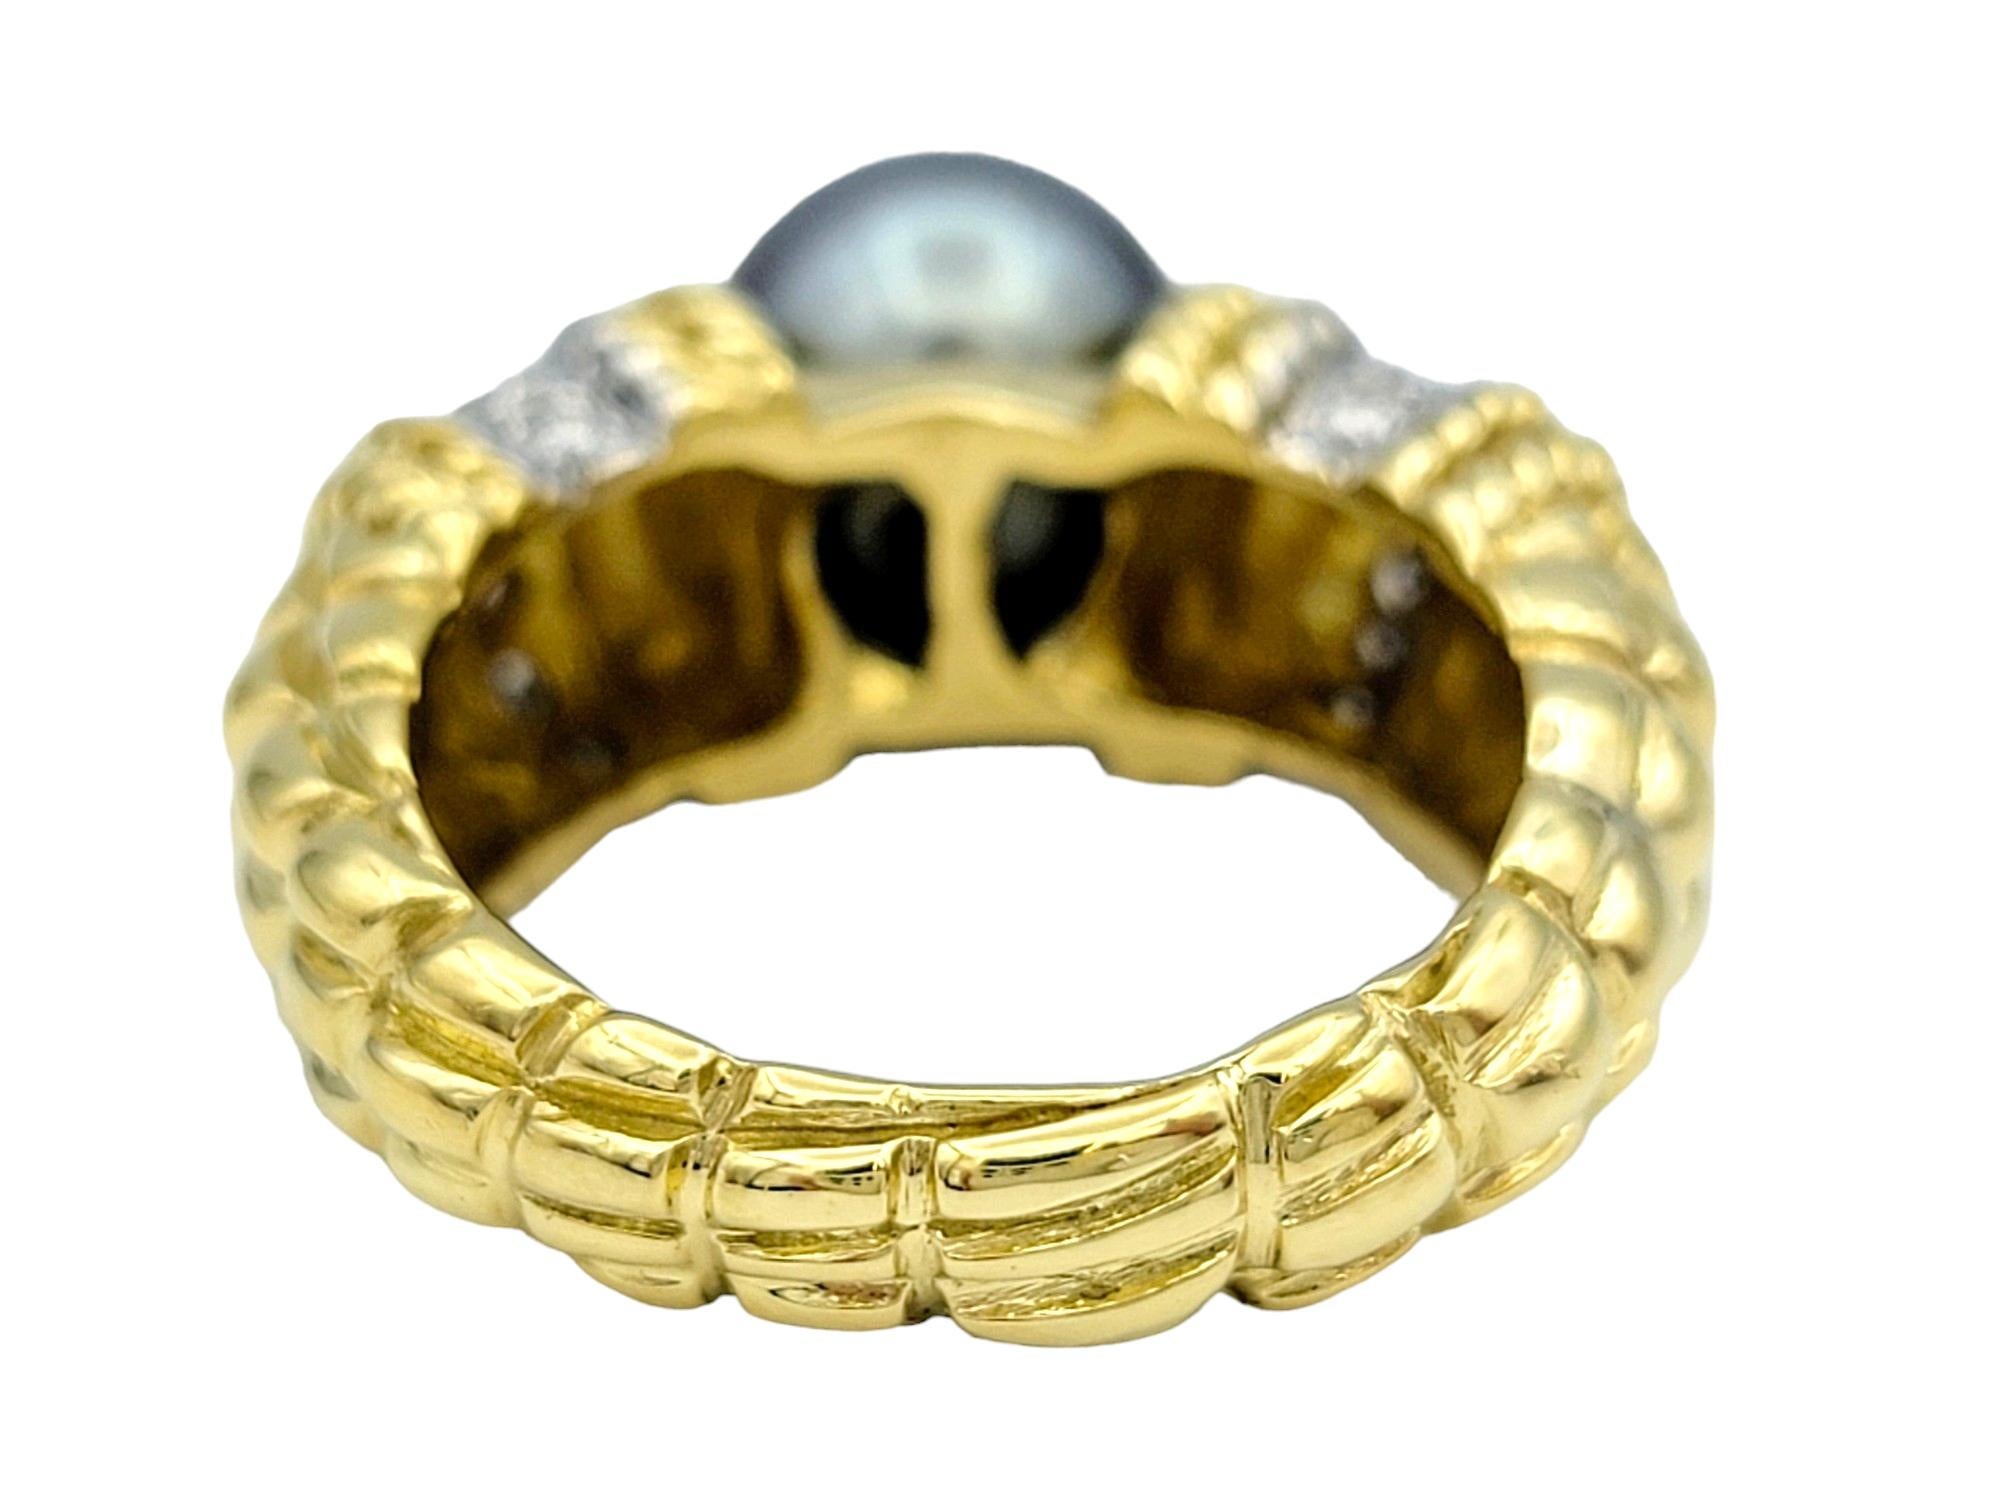 Cassis 9.5 mm Tahitian Pearl and Diamond Ring Set in 18 Karat Yellow Gold  In Good Condition For Sale In Scottsdale, AZ